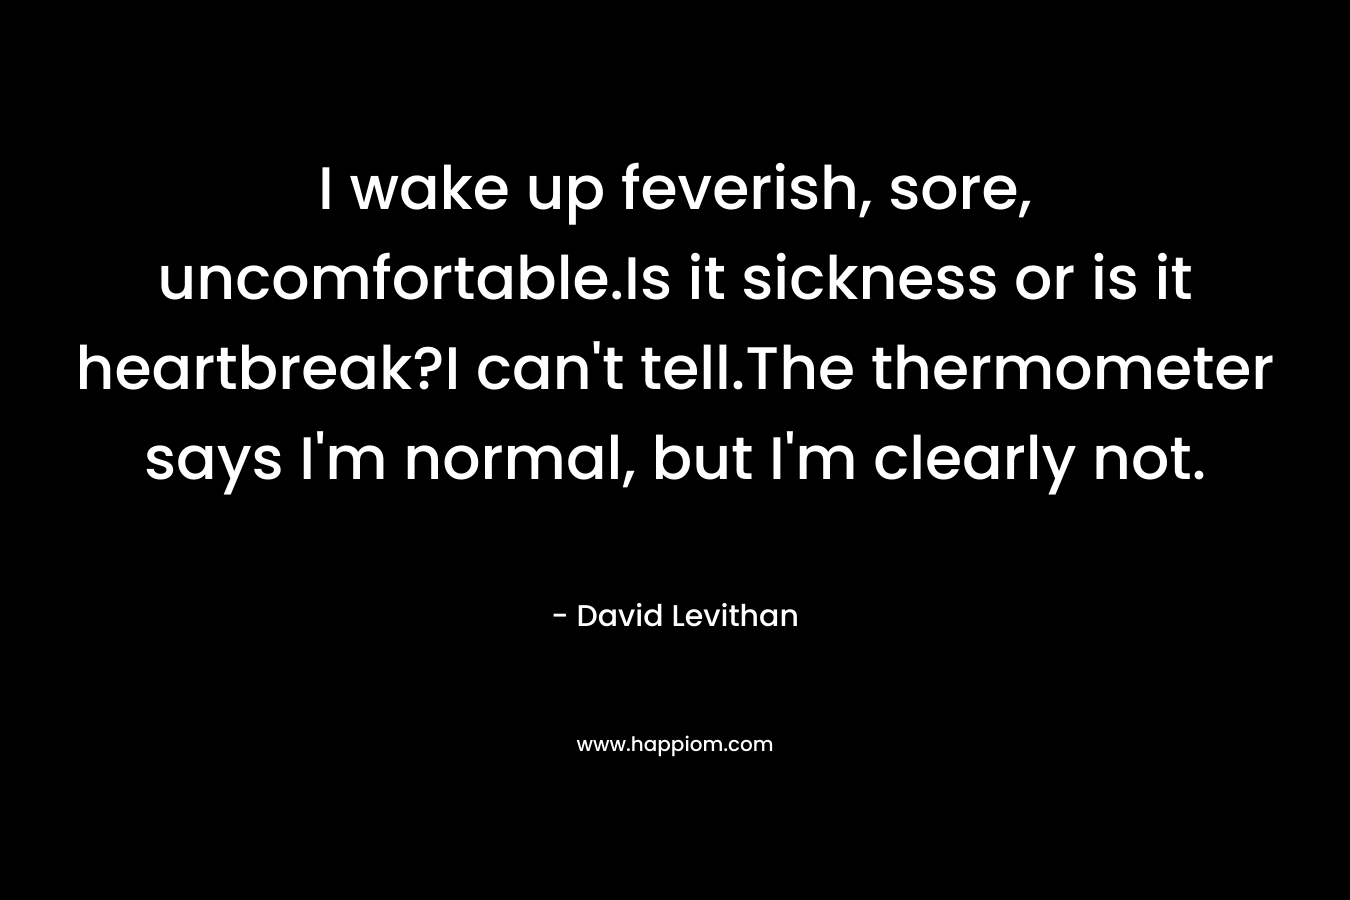 I wake up feverish, sore, uncomfortable.Is it sickness or is it heartbreak?I can't tell.The thermometer says I'm normal, but I'm clearly not.